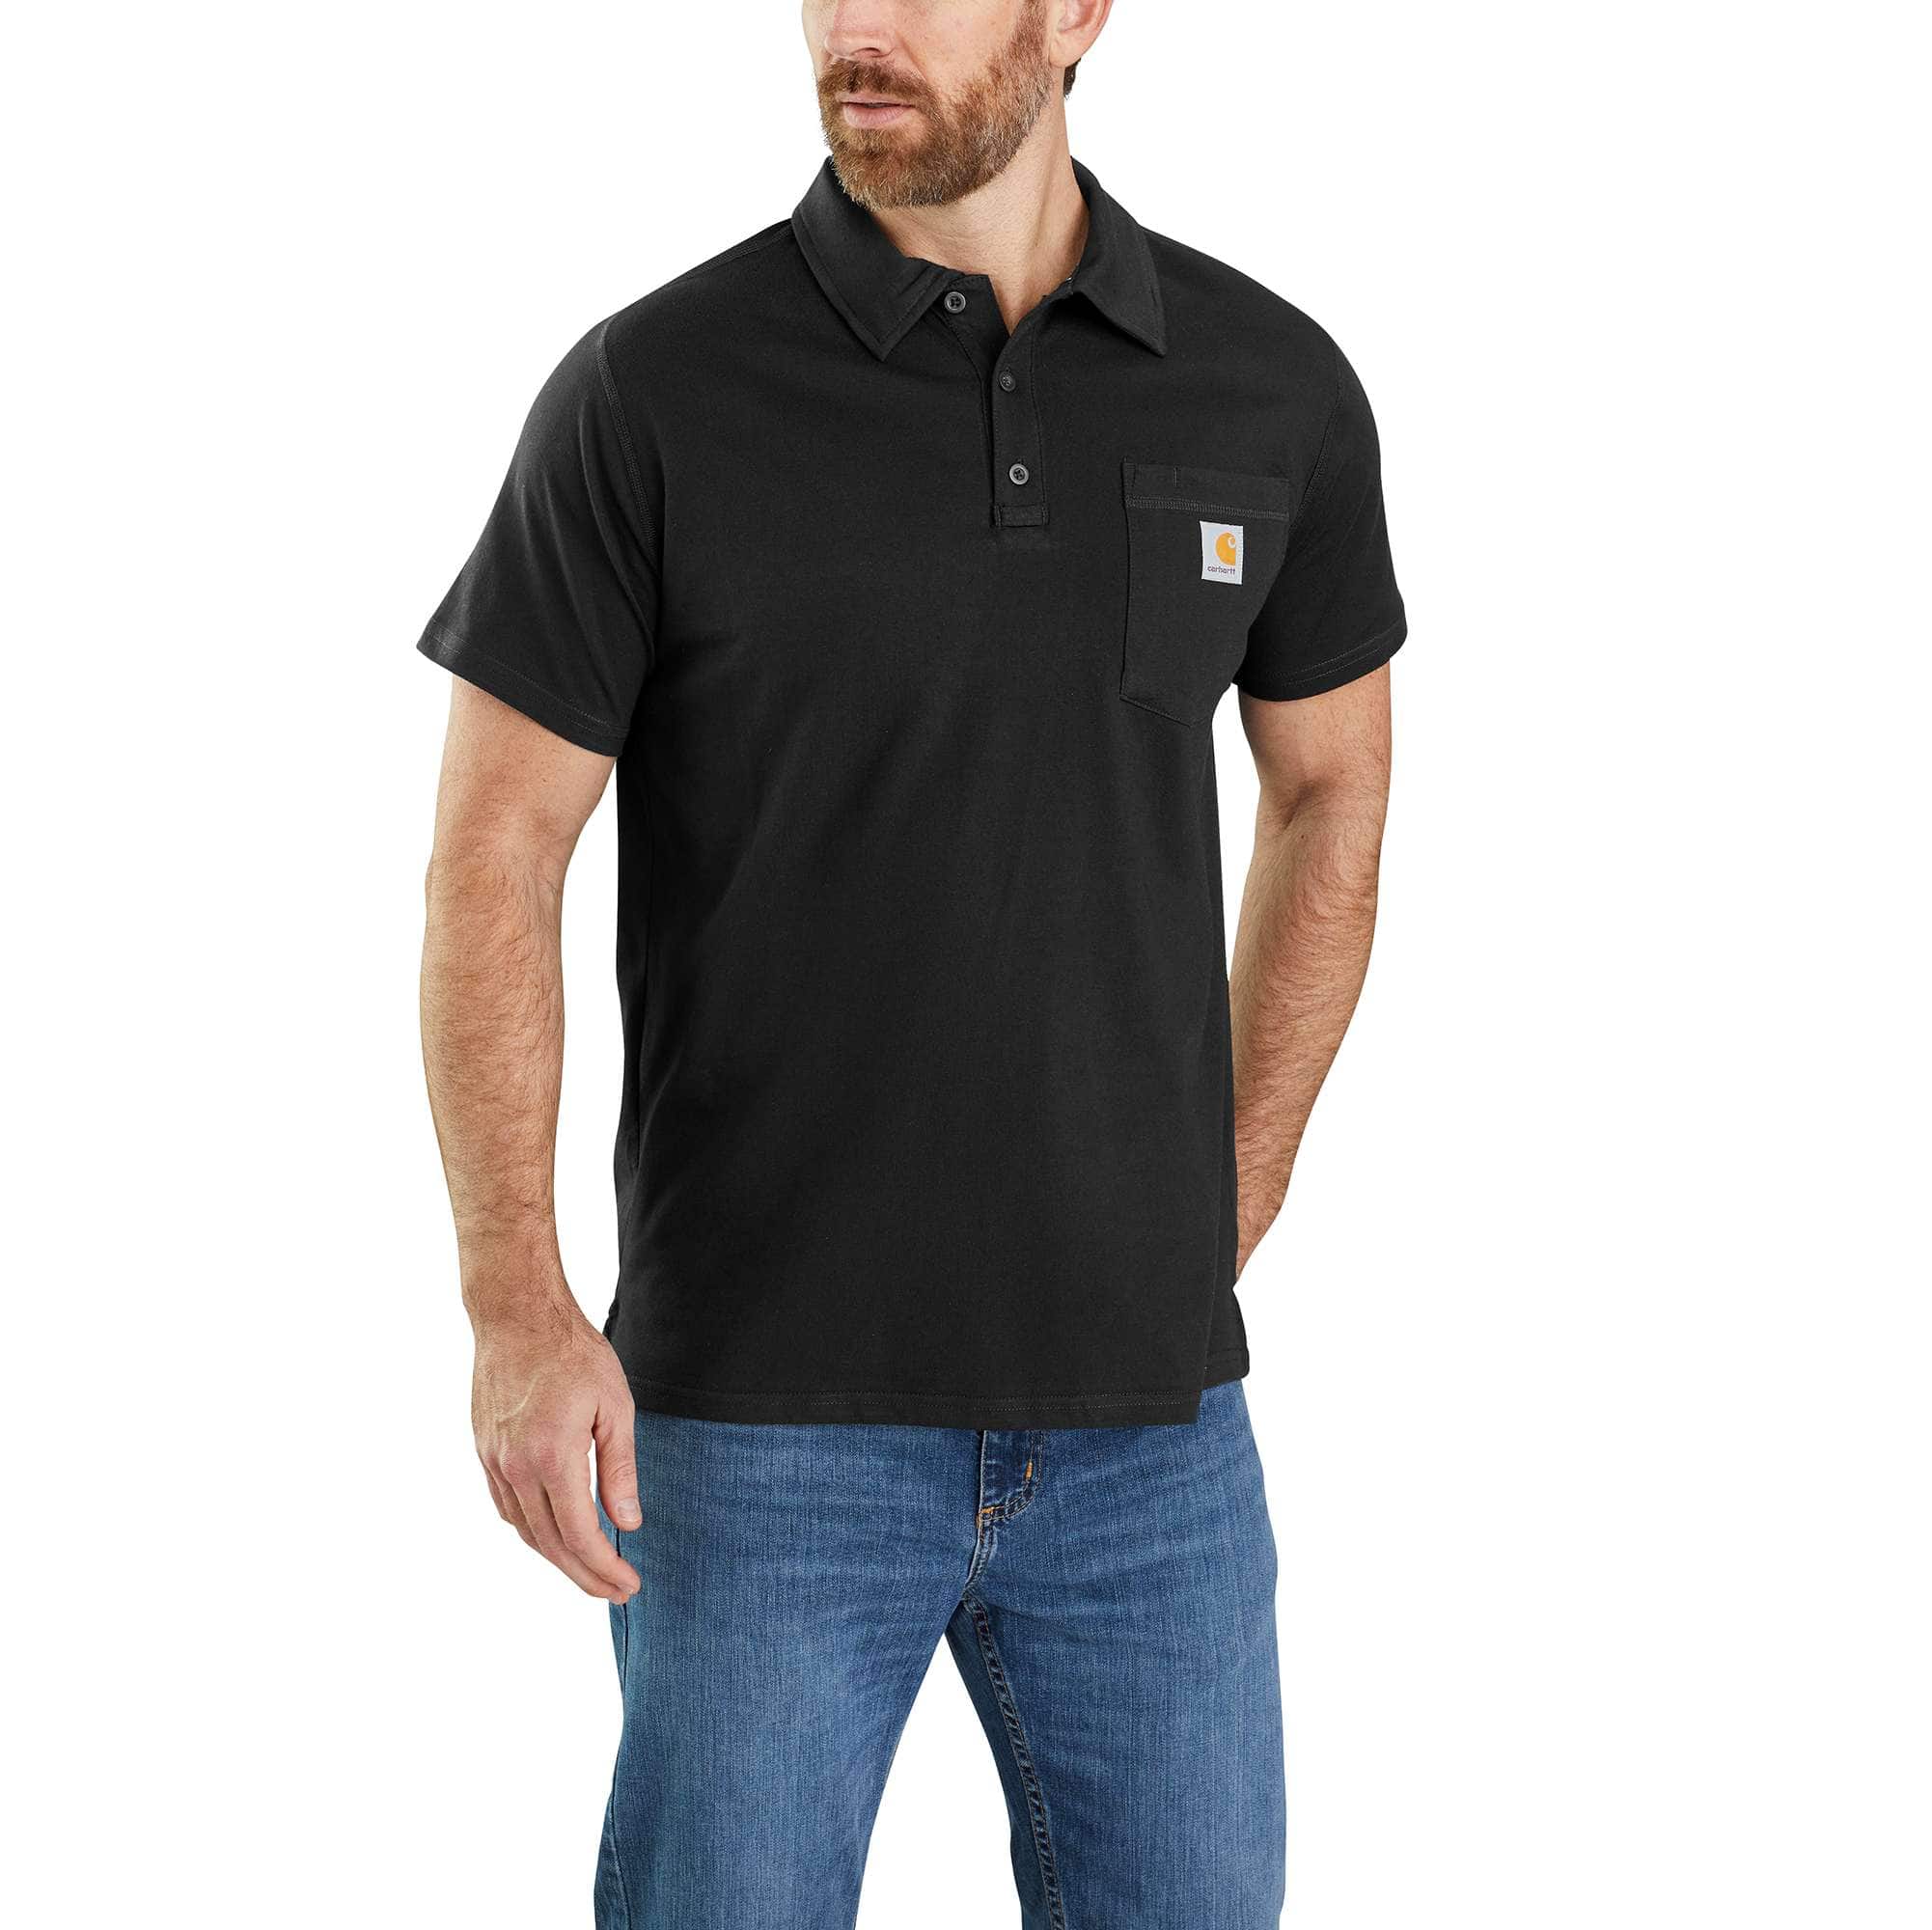 Carhartt Force® Relaxed Fit Midweight Short-Sleeve Pocket Polo